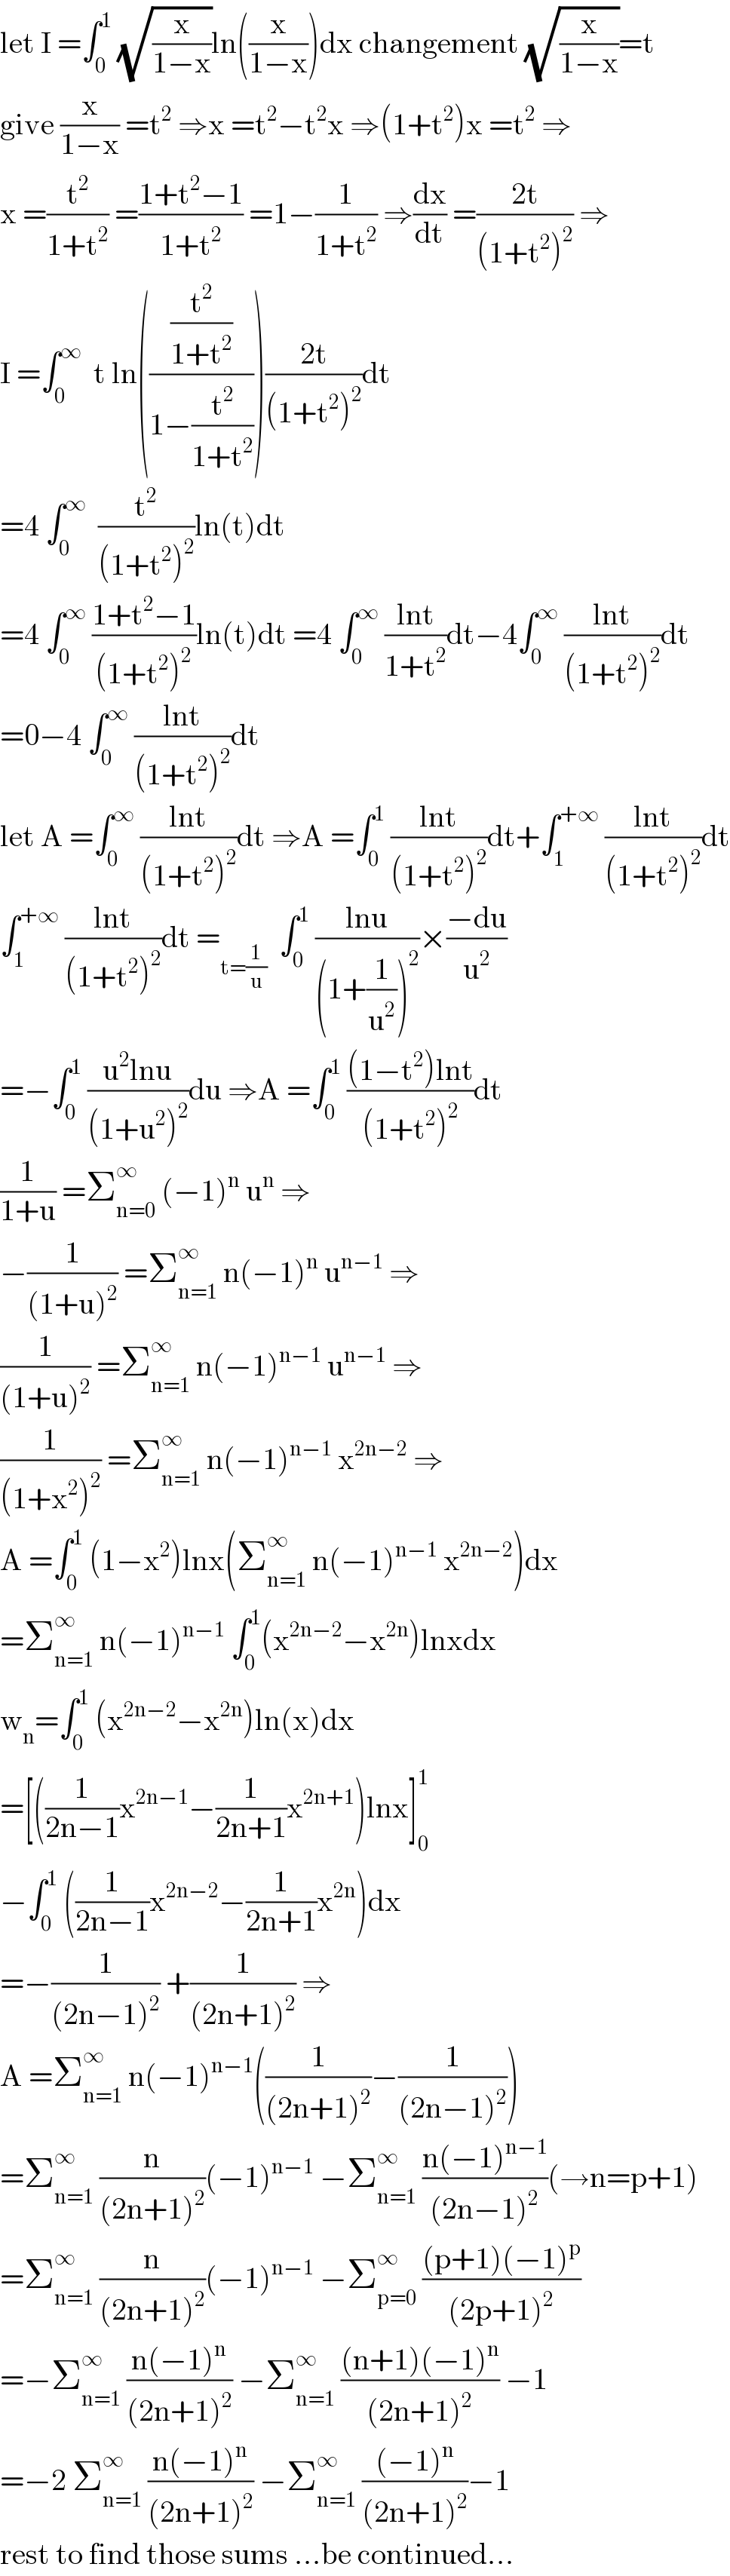 let I =∫_0 ^1  (√(x/(1−x)))ln((x/(1−x)))dx changement (√(x/(1−x)))=t  give (x/(1−x)) =t^2  ⇒x =t^2 −t^2 x ⇒(1+t^2 )x =t^2  ⇒  x =(t^2 /(1+t^2 )) =((1+t^2 −1)/(1+t^2 )) =1−(1/(1+t^2 )) ⇒(dx/dt) =((2t)/((1+t^2 )^2 )) ⇒  I =∫_0 ^∞   t ln(((t^2 /(1+t^2 ))/(1−(t^2 /(1+t^2 )))))((2t)/((1+t^2 )^2 ))dt  =4 ∫_0 ^∞   (t^2 /((1+t^2 )^2 ))ln(t)dt  =4 ∫_0 ^∞  ((1+t^2 −1)/((1+t^2 )^2 ))ln(t)dt =4 ∫_0 ^∞  ((lnt)/(1+t^2 ))dt−4∫_0 ^∞  ((lnt)/((1+t^2 )^2 ))dt  =0−4 ∫_0 ^∞  ((lnt)/((1+t^2 )^2 ))dt  let A =∫_0 ^∞  ((lnt)/((1+t^2 )^2 ))dt ⇒A =∫_0 ^1  ((lnt)/((1+t^2 )^2 ))dt+∫_1 ^(+∞)  ((lnt)/((1+t^2 )^2 ))dt  ∫_1 ^(+∞)  ((lnt)/((1+t^2 )^2 ))dt =_(t=(1/u))   ∫_0 ^1  ((lnu)/((1+(1/u^2 ))^2 ))×((−du)/u^2 )  =−∫_0 ^1  ((u^2 lnu)/((1+u^2 )^2 ))du ⇒A =∫_0 ^1  (((1−t^2 )lnt)/((1+t^2 )^2 ))dt  (1/(1+u)) =Σ_(n=0) ^∞  (−1)^n  u^n  ⇒  −(1/((1+u)^2 )) =Σ_(n=1) ^∞  n(−1)^n  u^(n−1)  ⇒  (1/((1+u)^2 )) =Σ_(n=1) ^∞  n(−1)^(n−1)  u^(n−1)  ⇒  (1/((1+x^2 )^2 )) =Σ_(n=1) ^∞  n(−1)^(n−1)  x^(2n−2)  ⇒  A =∫_0 ^1  (1−x^2 )lnx(Σ_(n=1) ^∞  n(−1)^(n−1)  x^(2n−2) )dx  =Σ_(n=1) ^∞  n(−1)^(n−1)  ∫_0 ^1 (x^(2n−2) −x^(2n) )lnxdx  w_n =∫_0 ^1  (x^(2n−2) −x^(2n) )ln(x)dx  =[((1/(2n−1))x^(2n−1) −(1/(2n+1))x^(2n+1) )lnx]_0 ^1   −∫_0 ^1  ((1/(2n−1))x^(2n−2) −(1/(2n+1))x^(2n) )dx  =−(1/((2n−1)^2 )) +(1/((2n+1)^2 )) ⇒  A =Σ_(n=1) ^∞  n(−1)^(n−1) ((1/((2n+1)^2 ))−(1/((2n−1)^2 )))  =Σ_(n=1) ^∞  (n/((2n+1)^2 ))(−1)^(n−1)  −Σ_(n=1) ^∞  ((n(−1)^(n−1) )/((2n−1)^2 ))(→n=p+1)  =Σ_(n=1) ^∞  (n/((2n+1)^2 ))(−1)^(n−1)  −Σ_(p=0) ^∞  (((p+1)(−1)^p )/((2p+1)^2 ))  =−Σ_(n=1) ^∞  ((n(−1)^n )/((2n+1)^2 )) −Σ_(n=1) ^∞  (((n+1)(−1)^n )/((2n+1)^2 )) −1  =−2 Σ_(n=1) ^∞  ((n(−1)^n )/((2n+1)^2 )) −Σ_(n=1) ^∞  (((−1)^n )/((2n+1)^2 ))−1  rest to find those sums ...be continued...  